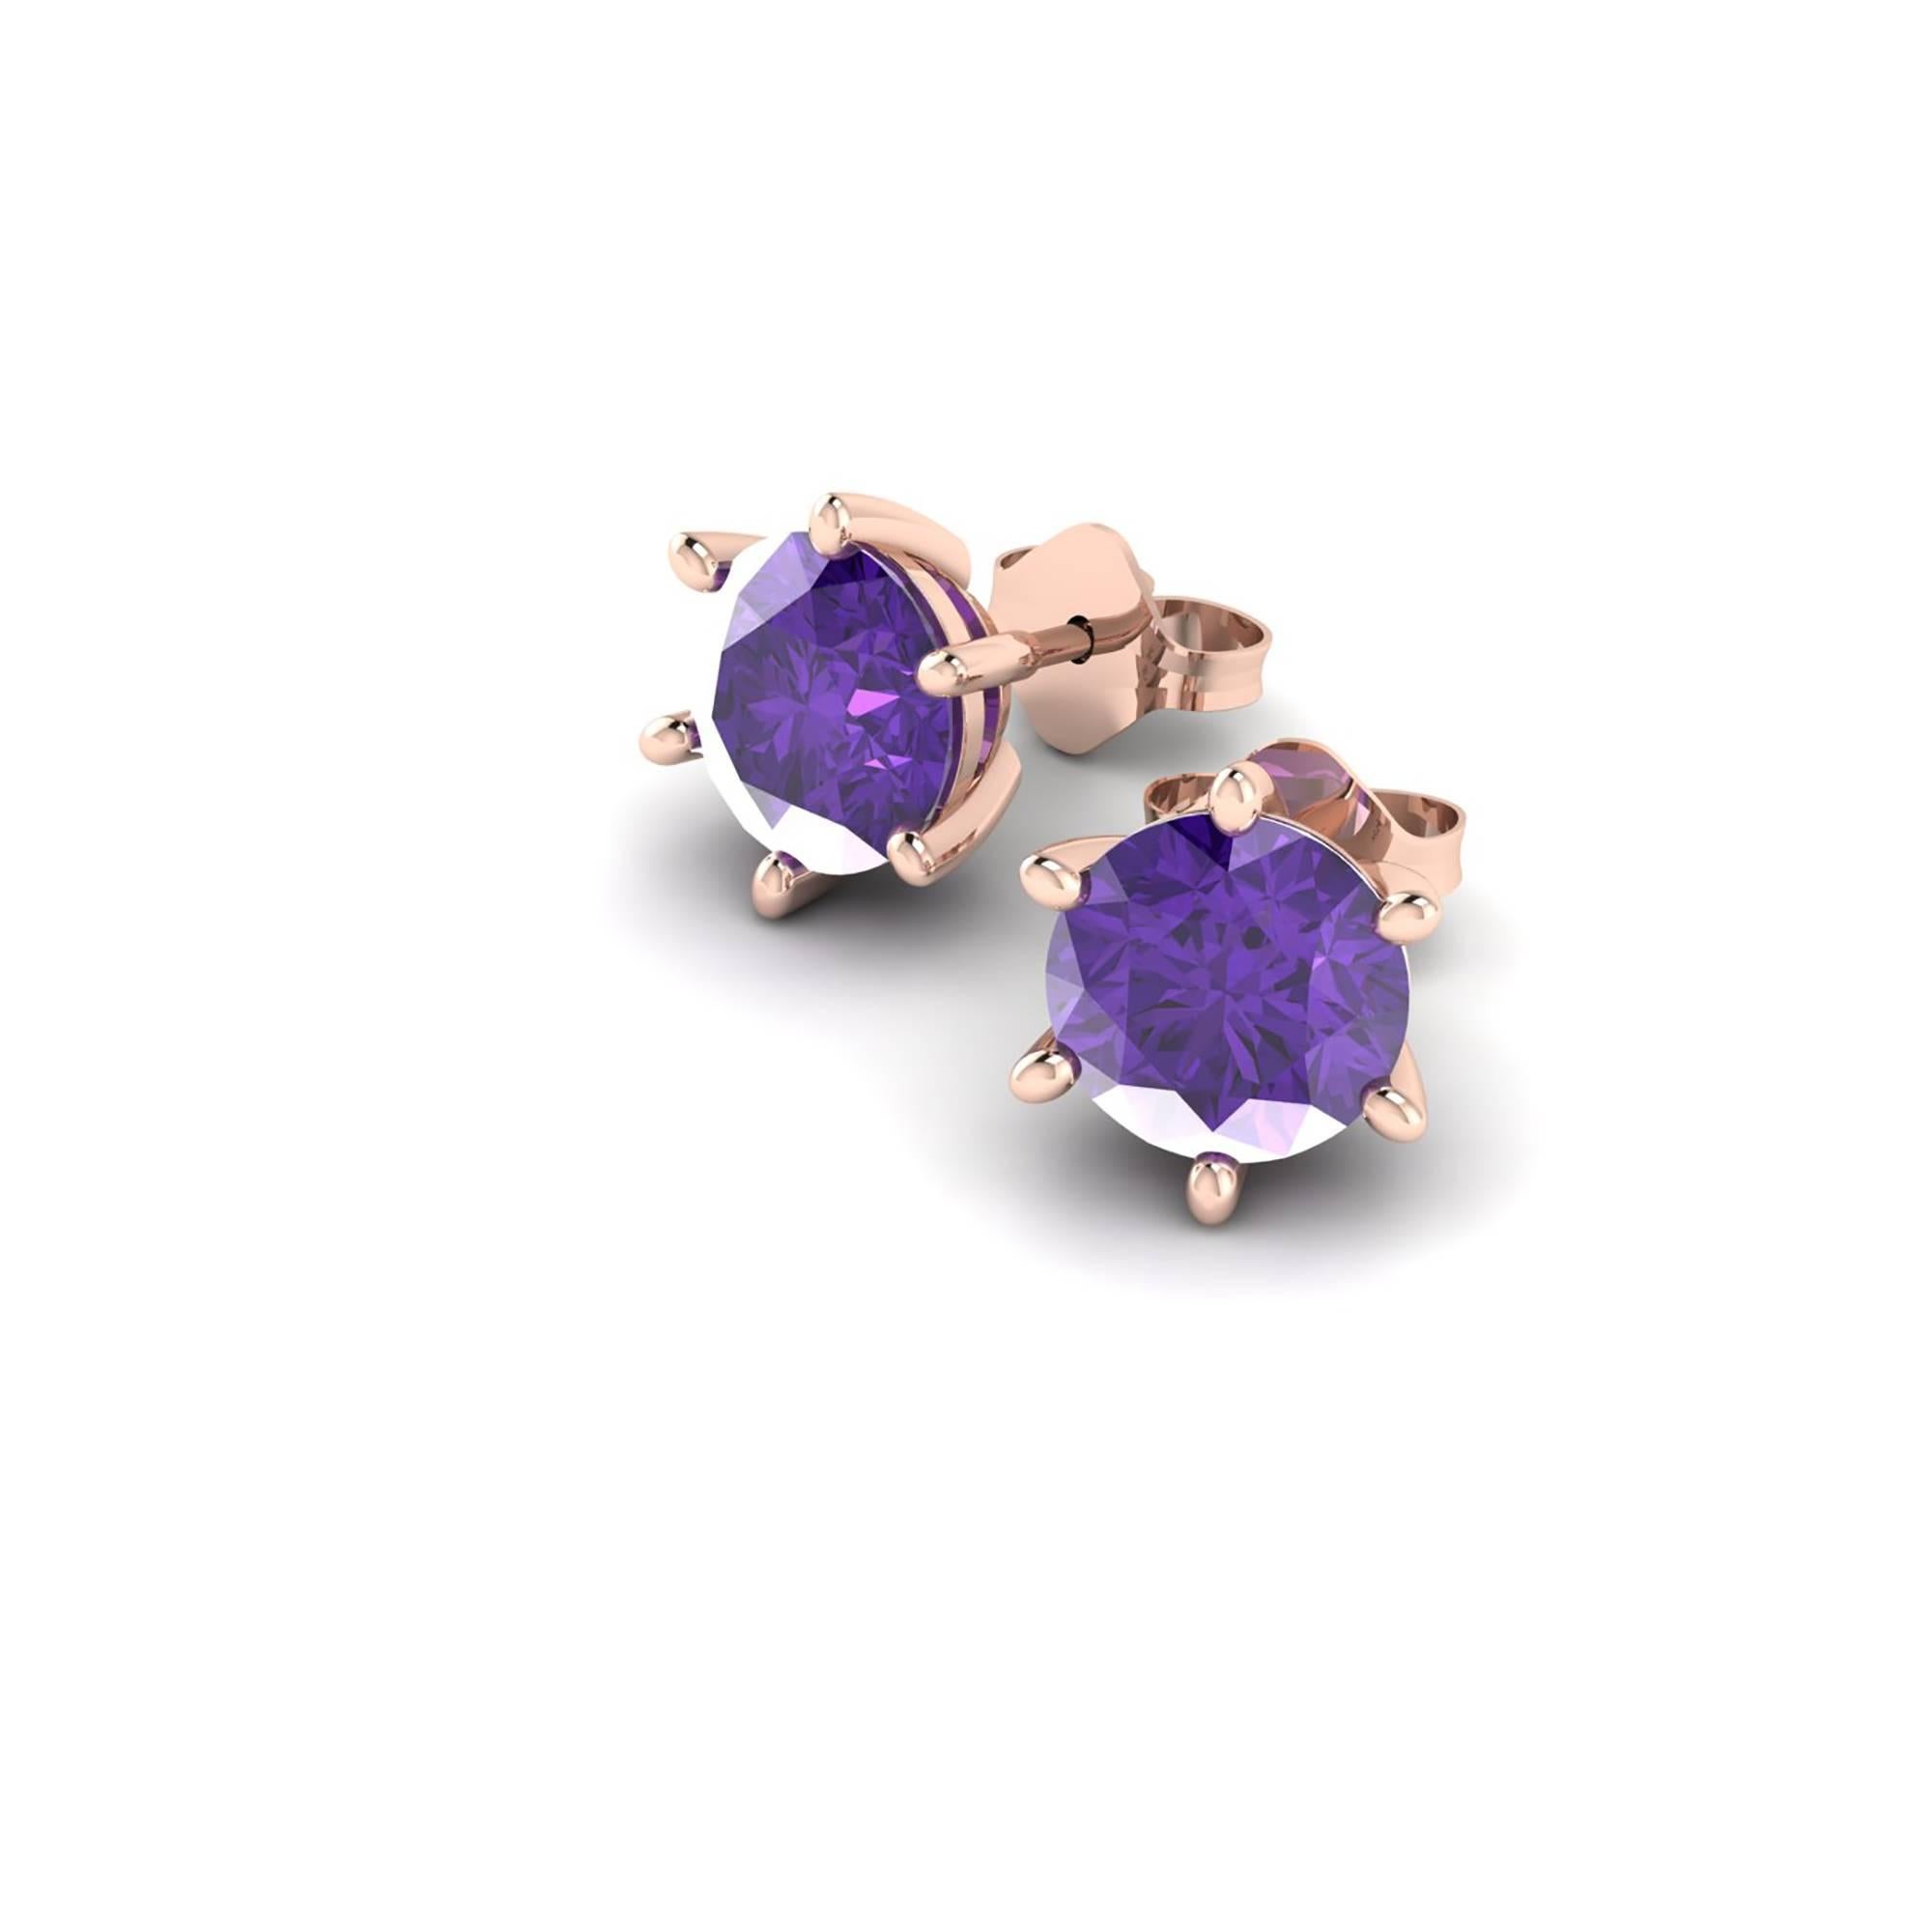 Ferrucci natural round Amethyst ear-studs, for an approximately 2.00 carats, hand made in 18k rose gold by Italian master jeweler Francesco Ferrucci in New York City.

Perfect gift for any woman in any season, easy to wear from the office to an